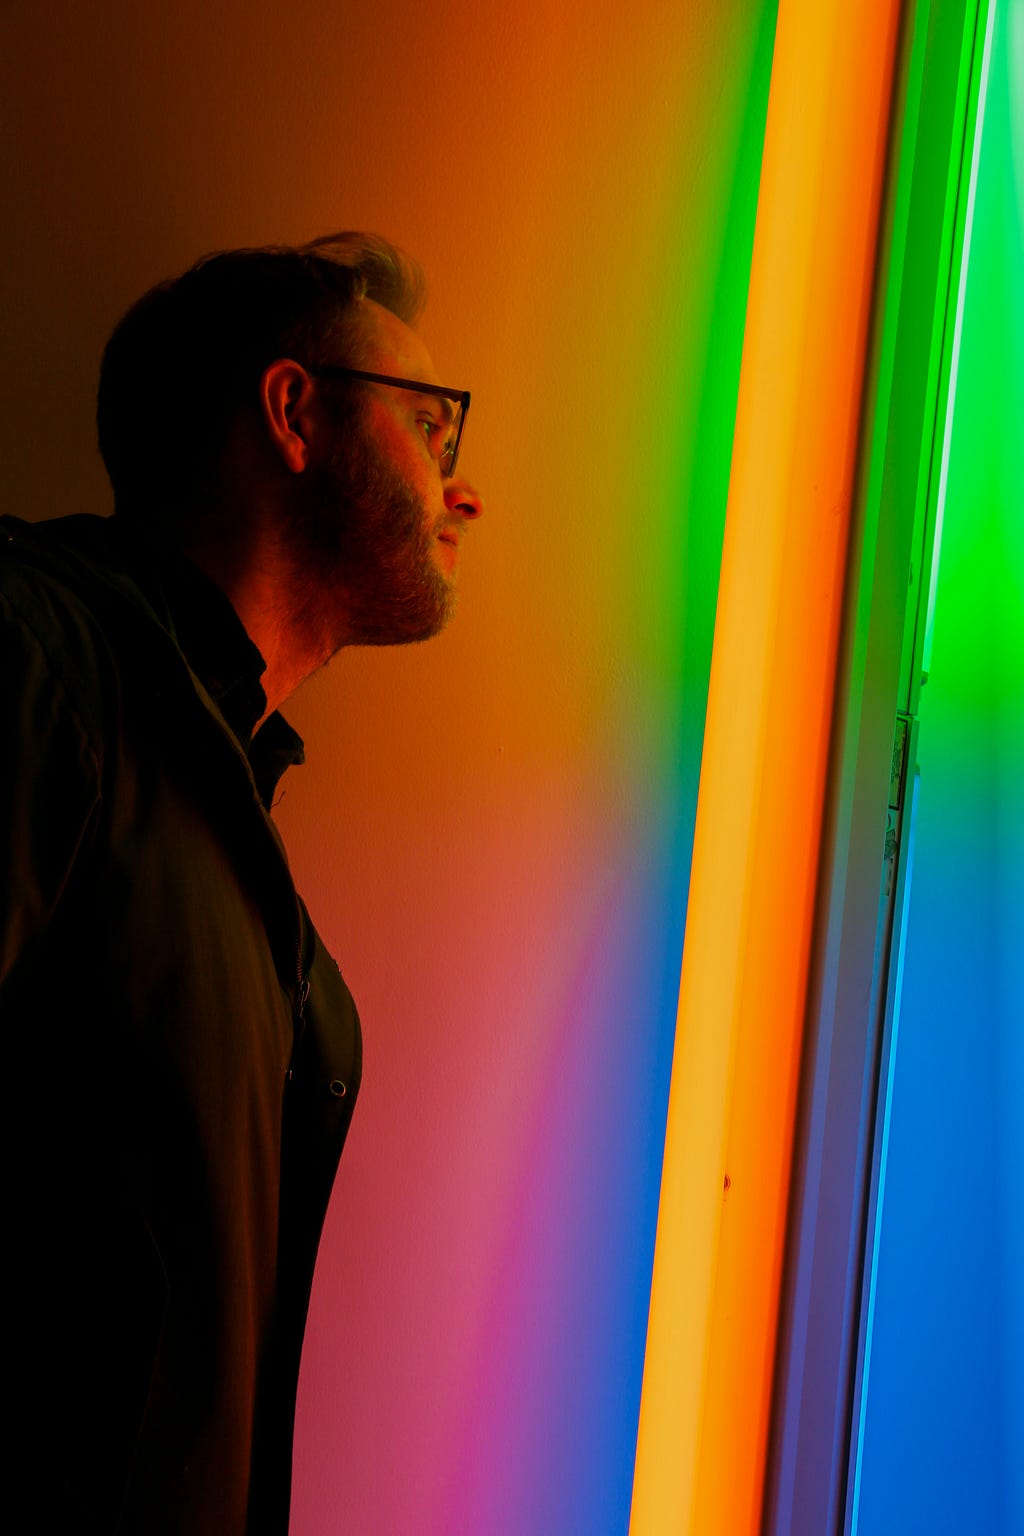 A man looks through a doorway illuminated with colorful gradients